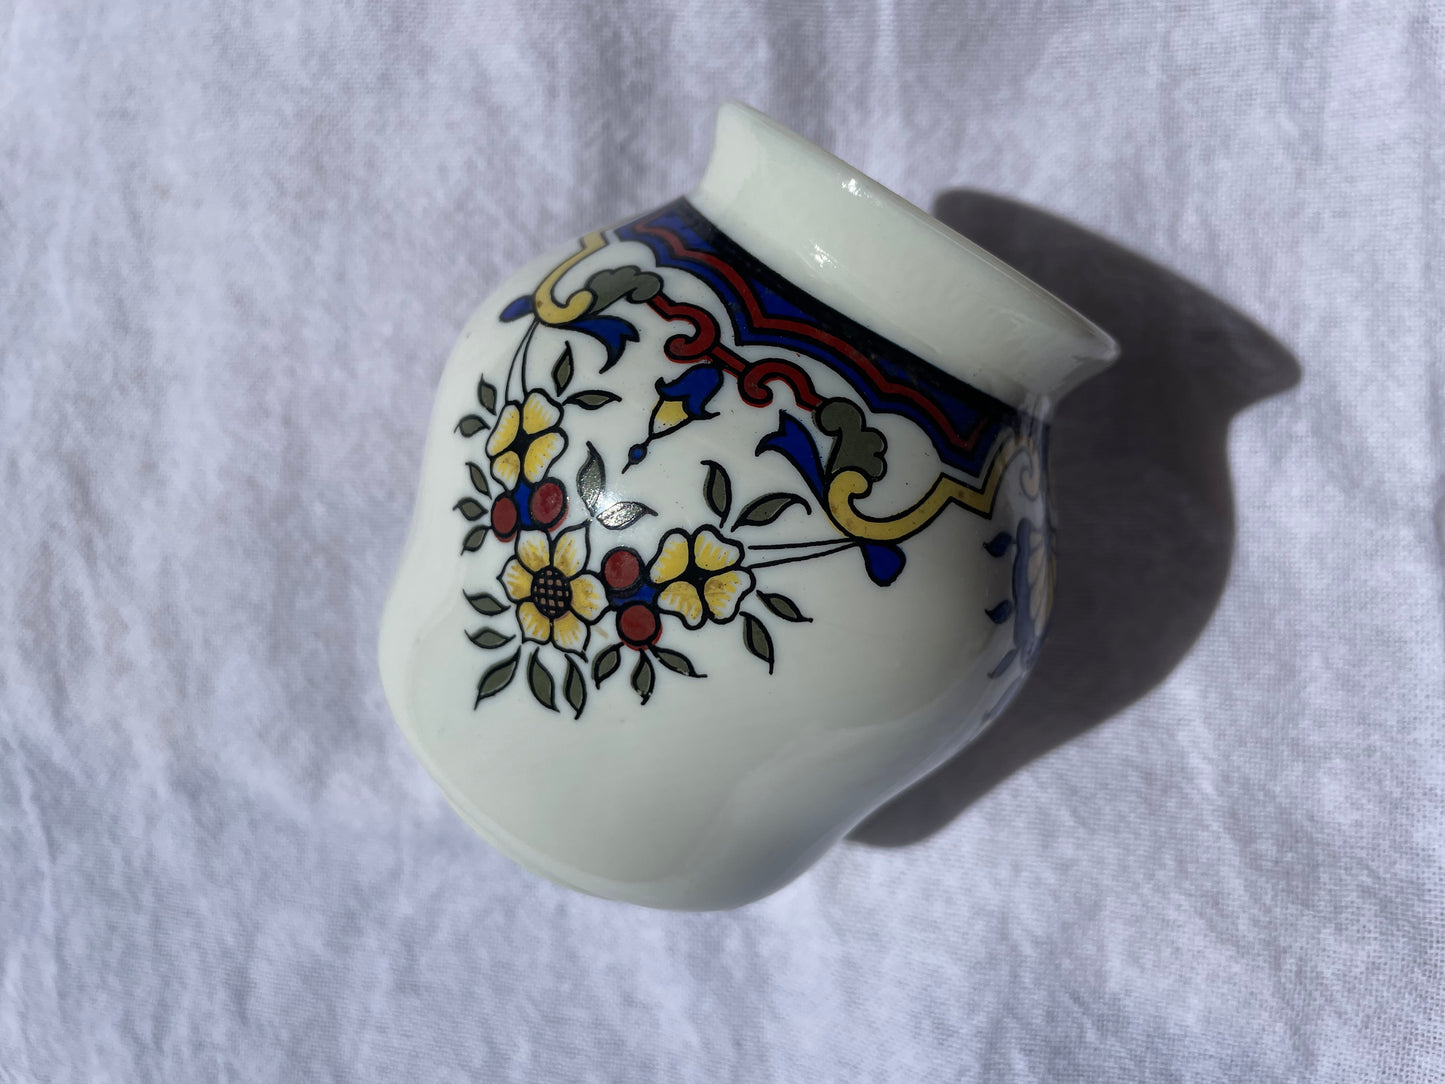 French Mustard Jar (Made in France) with Floral Design All Around